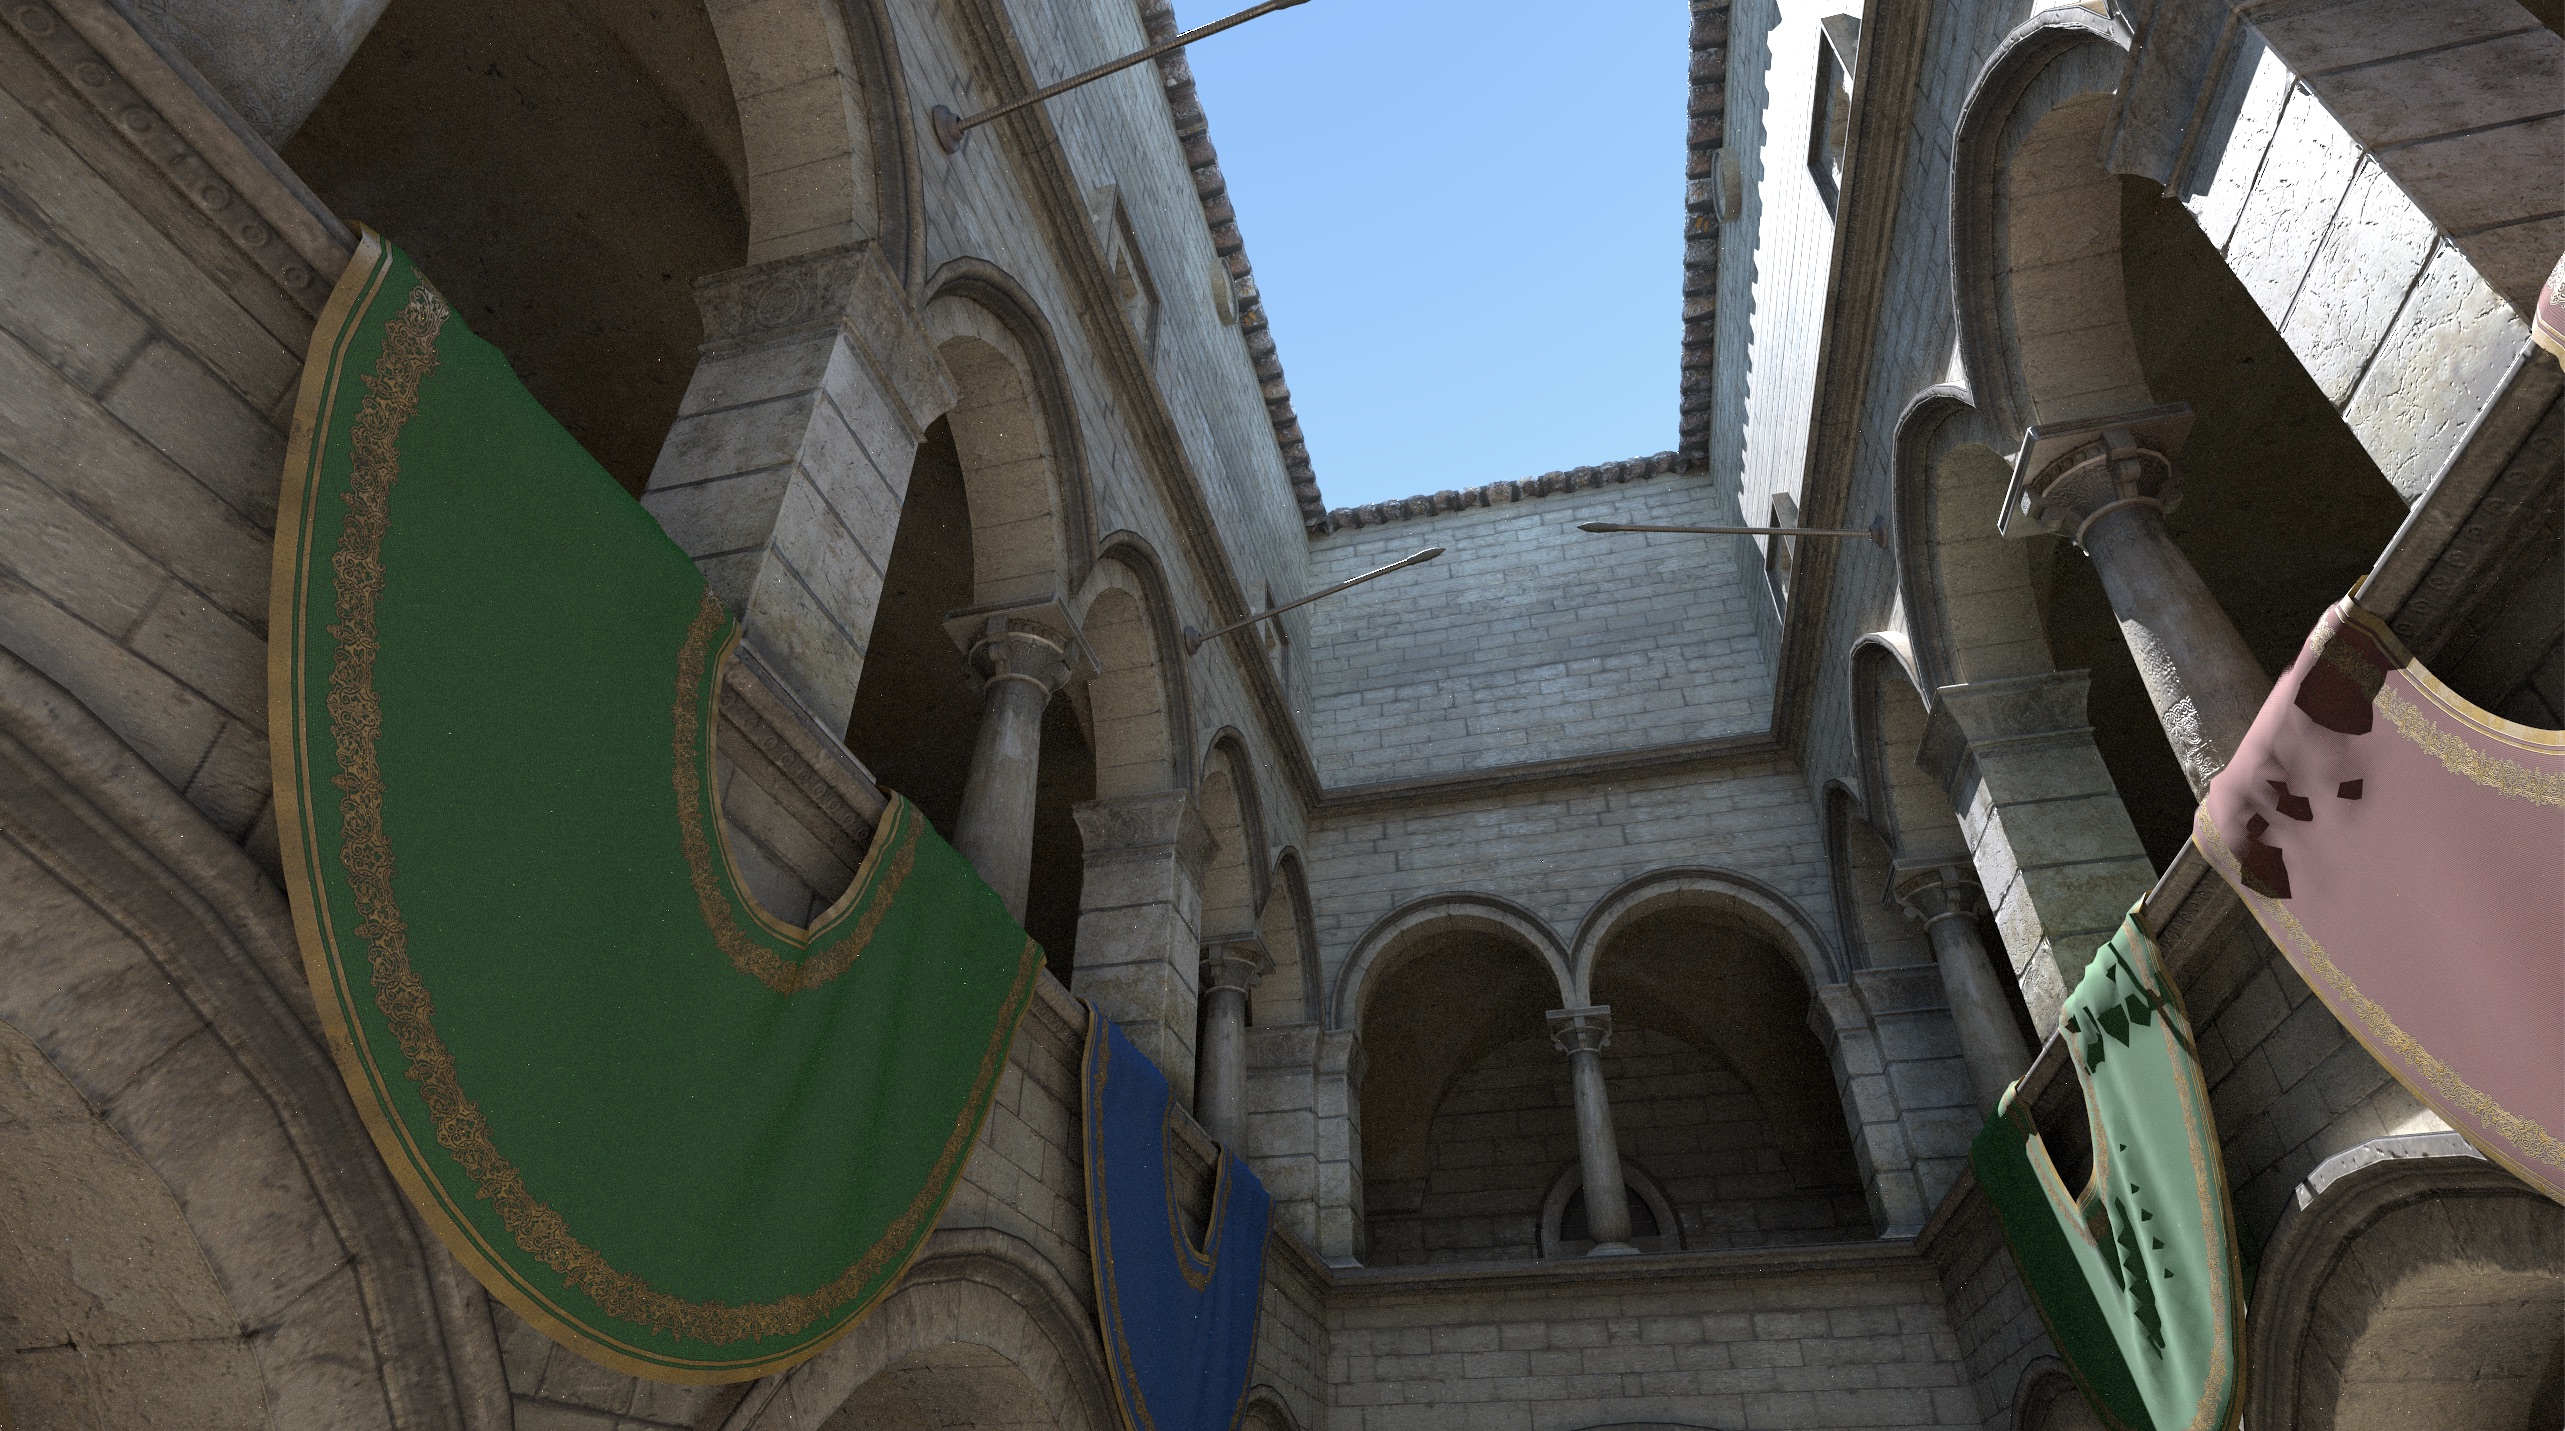 Sponza rendered from the same perspective by a path tracer